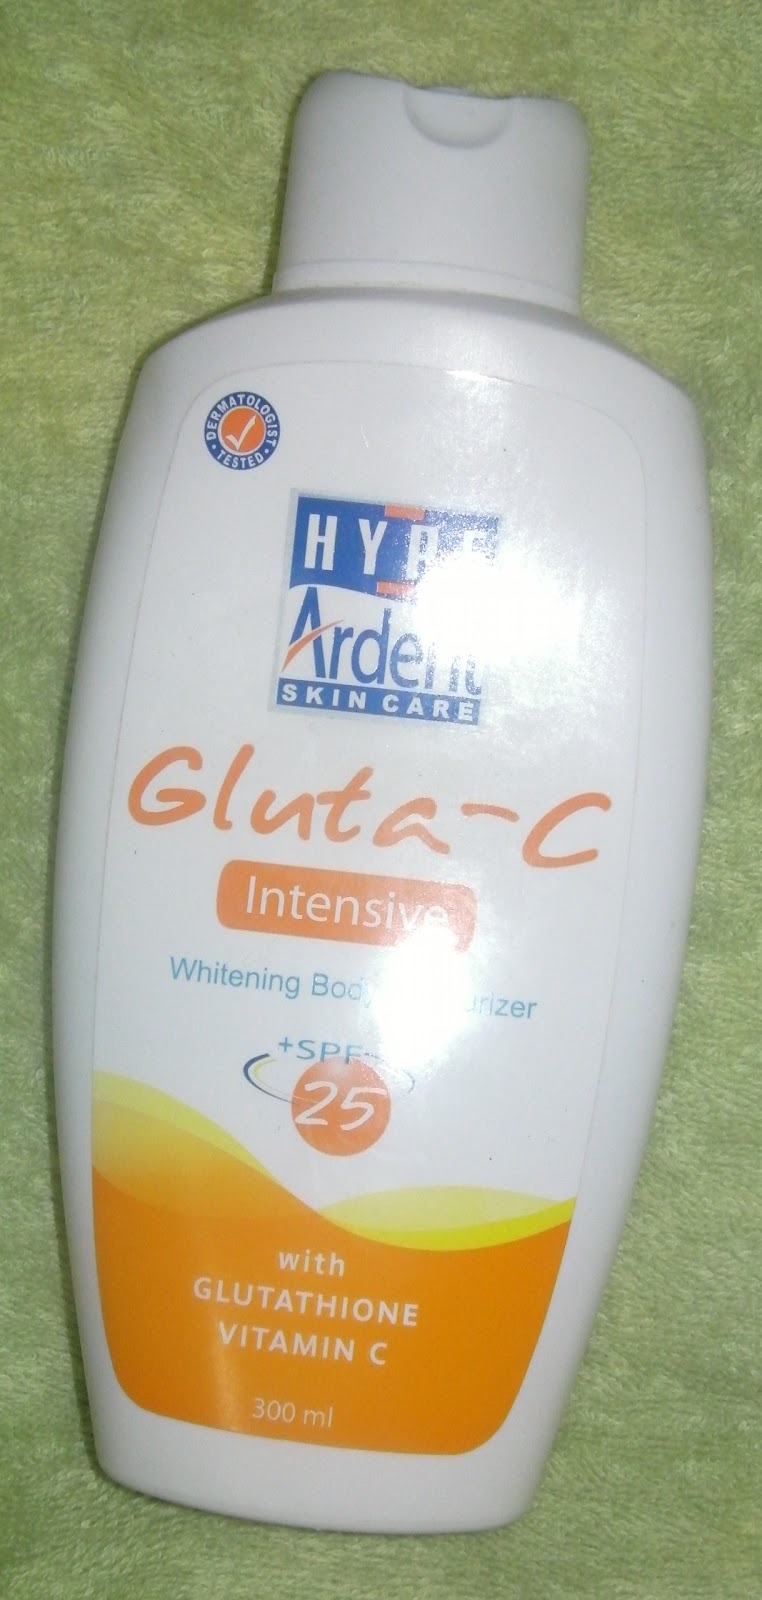 Hot or Not? HYPE Ardent Gluta-C